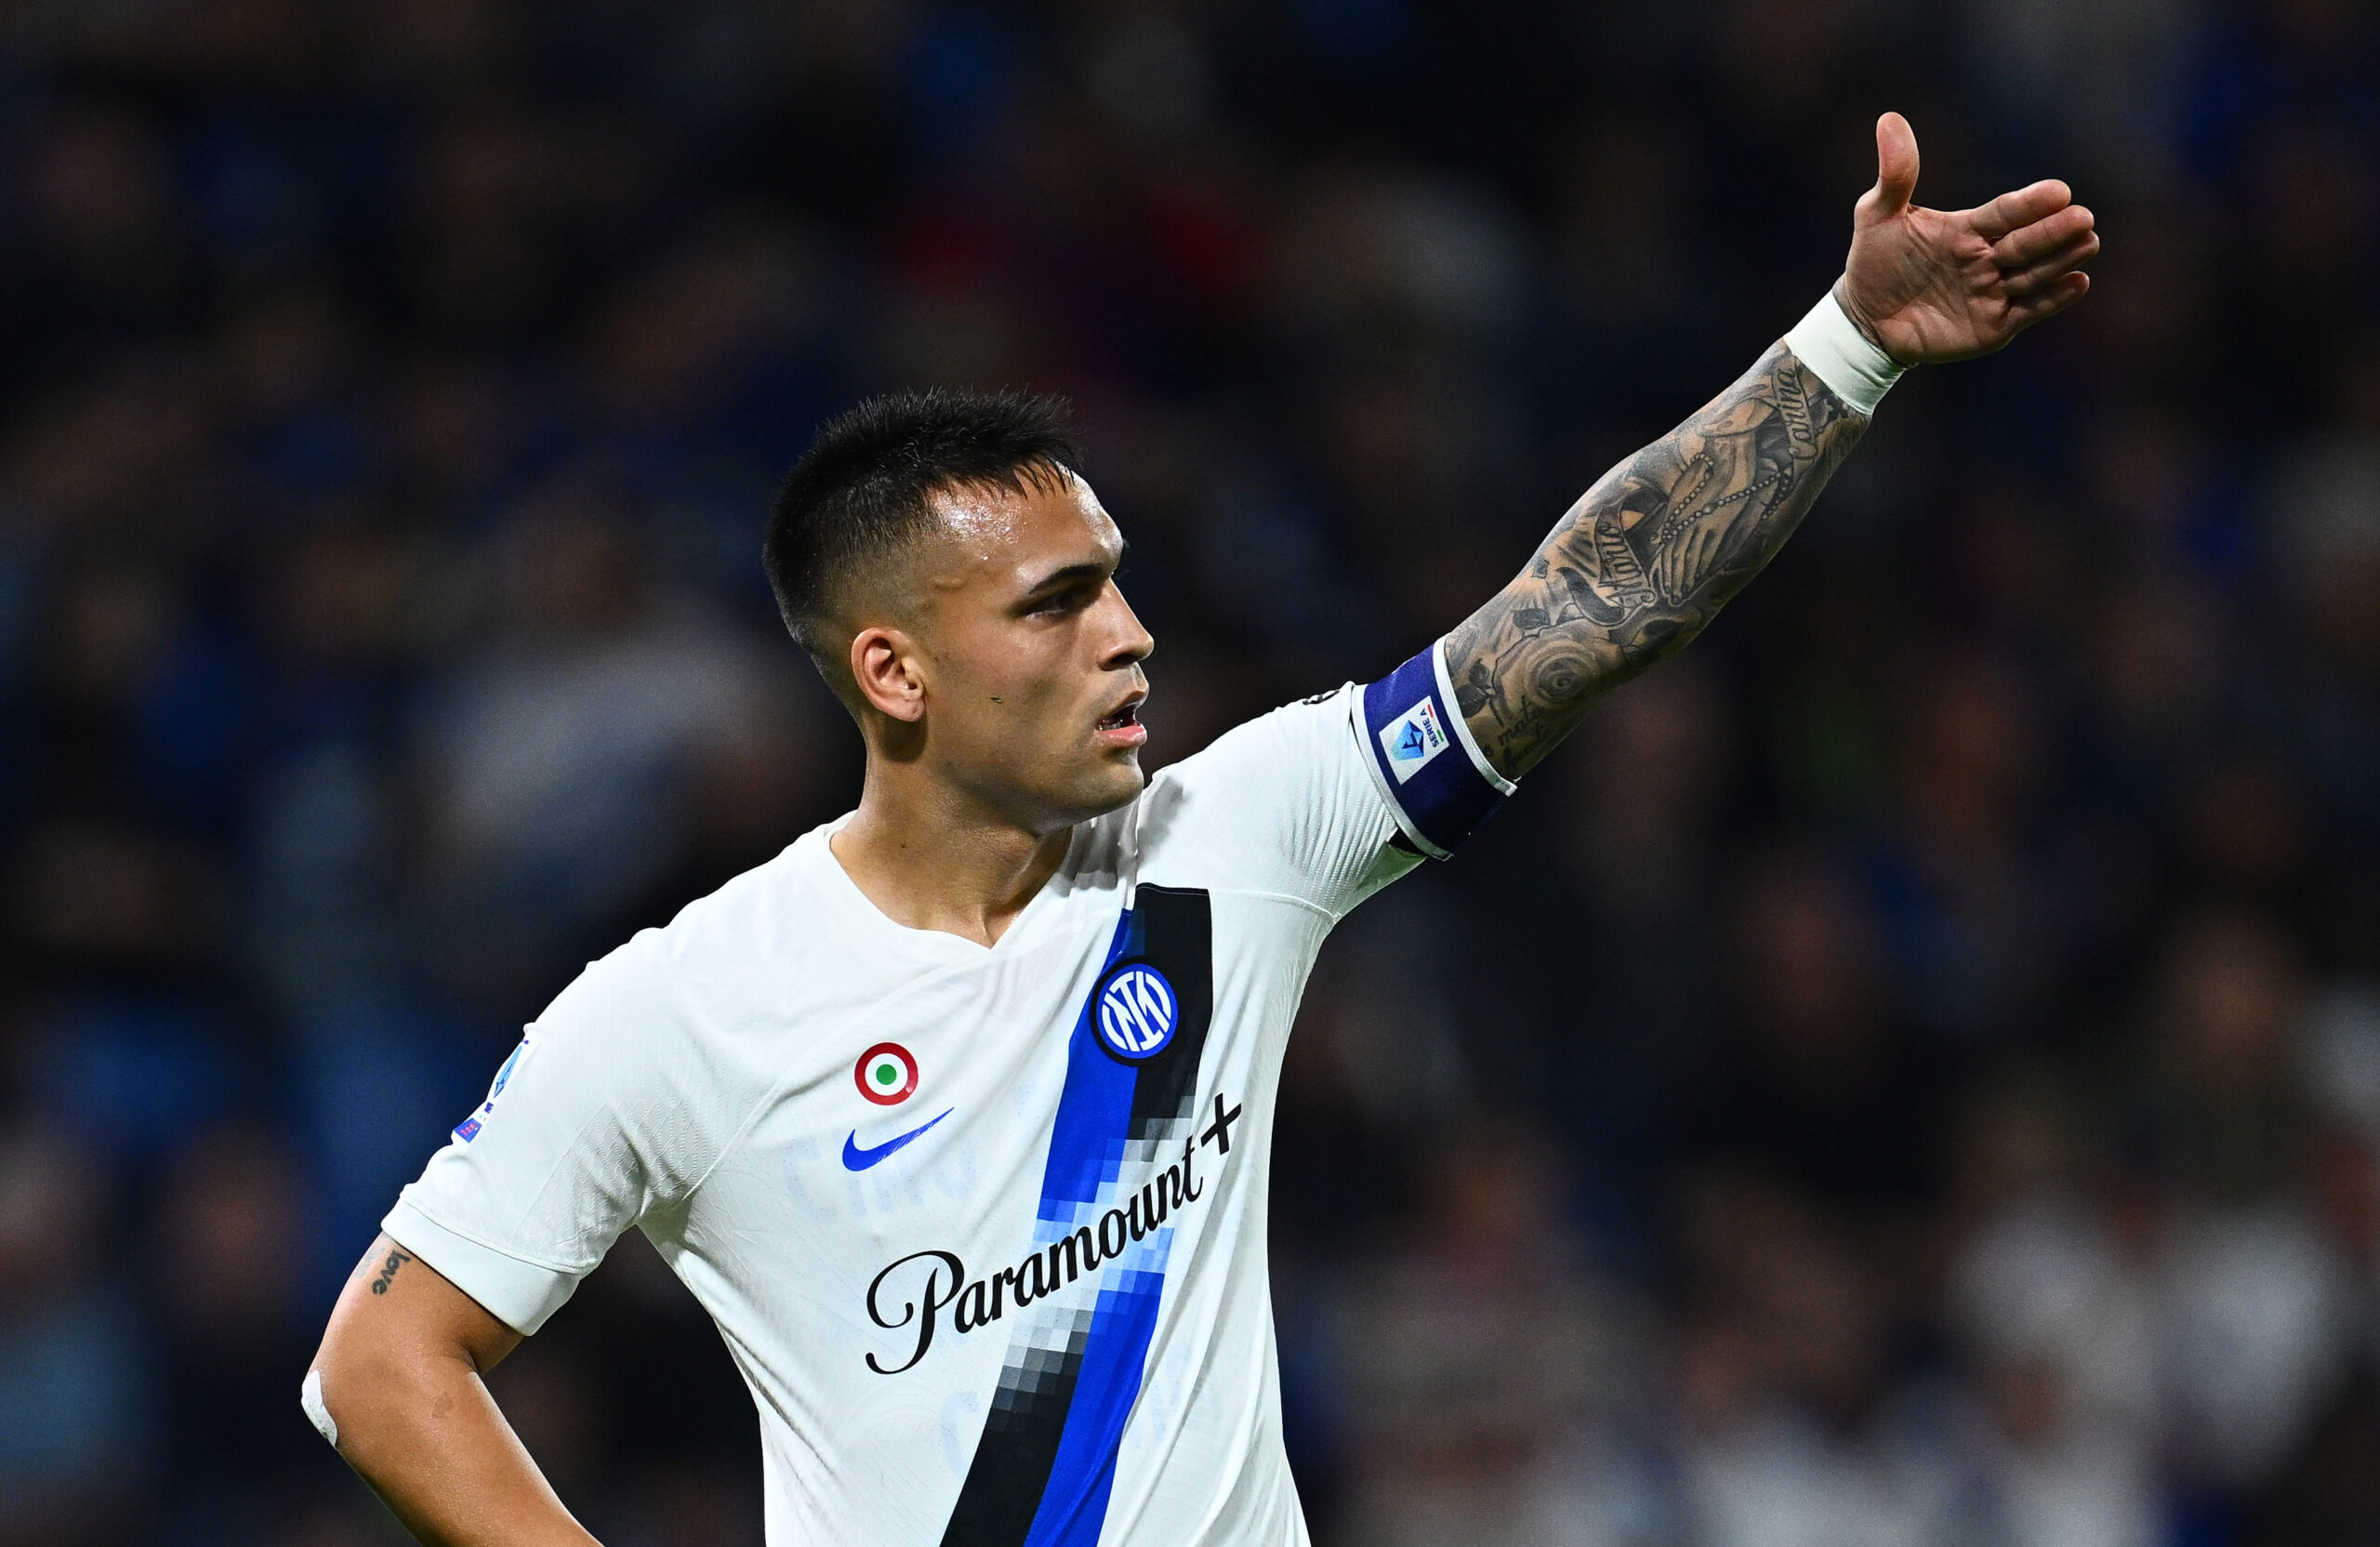 Lautaro Martinez and Inter have been negotiating a renewal for multiple months and, despite the mutual will, the agreement hasn’t arrived yet.